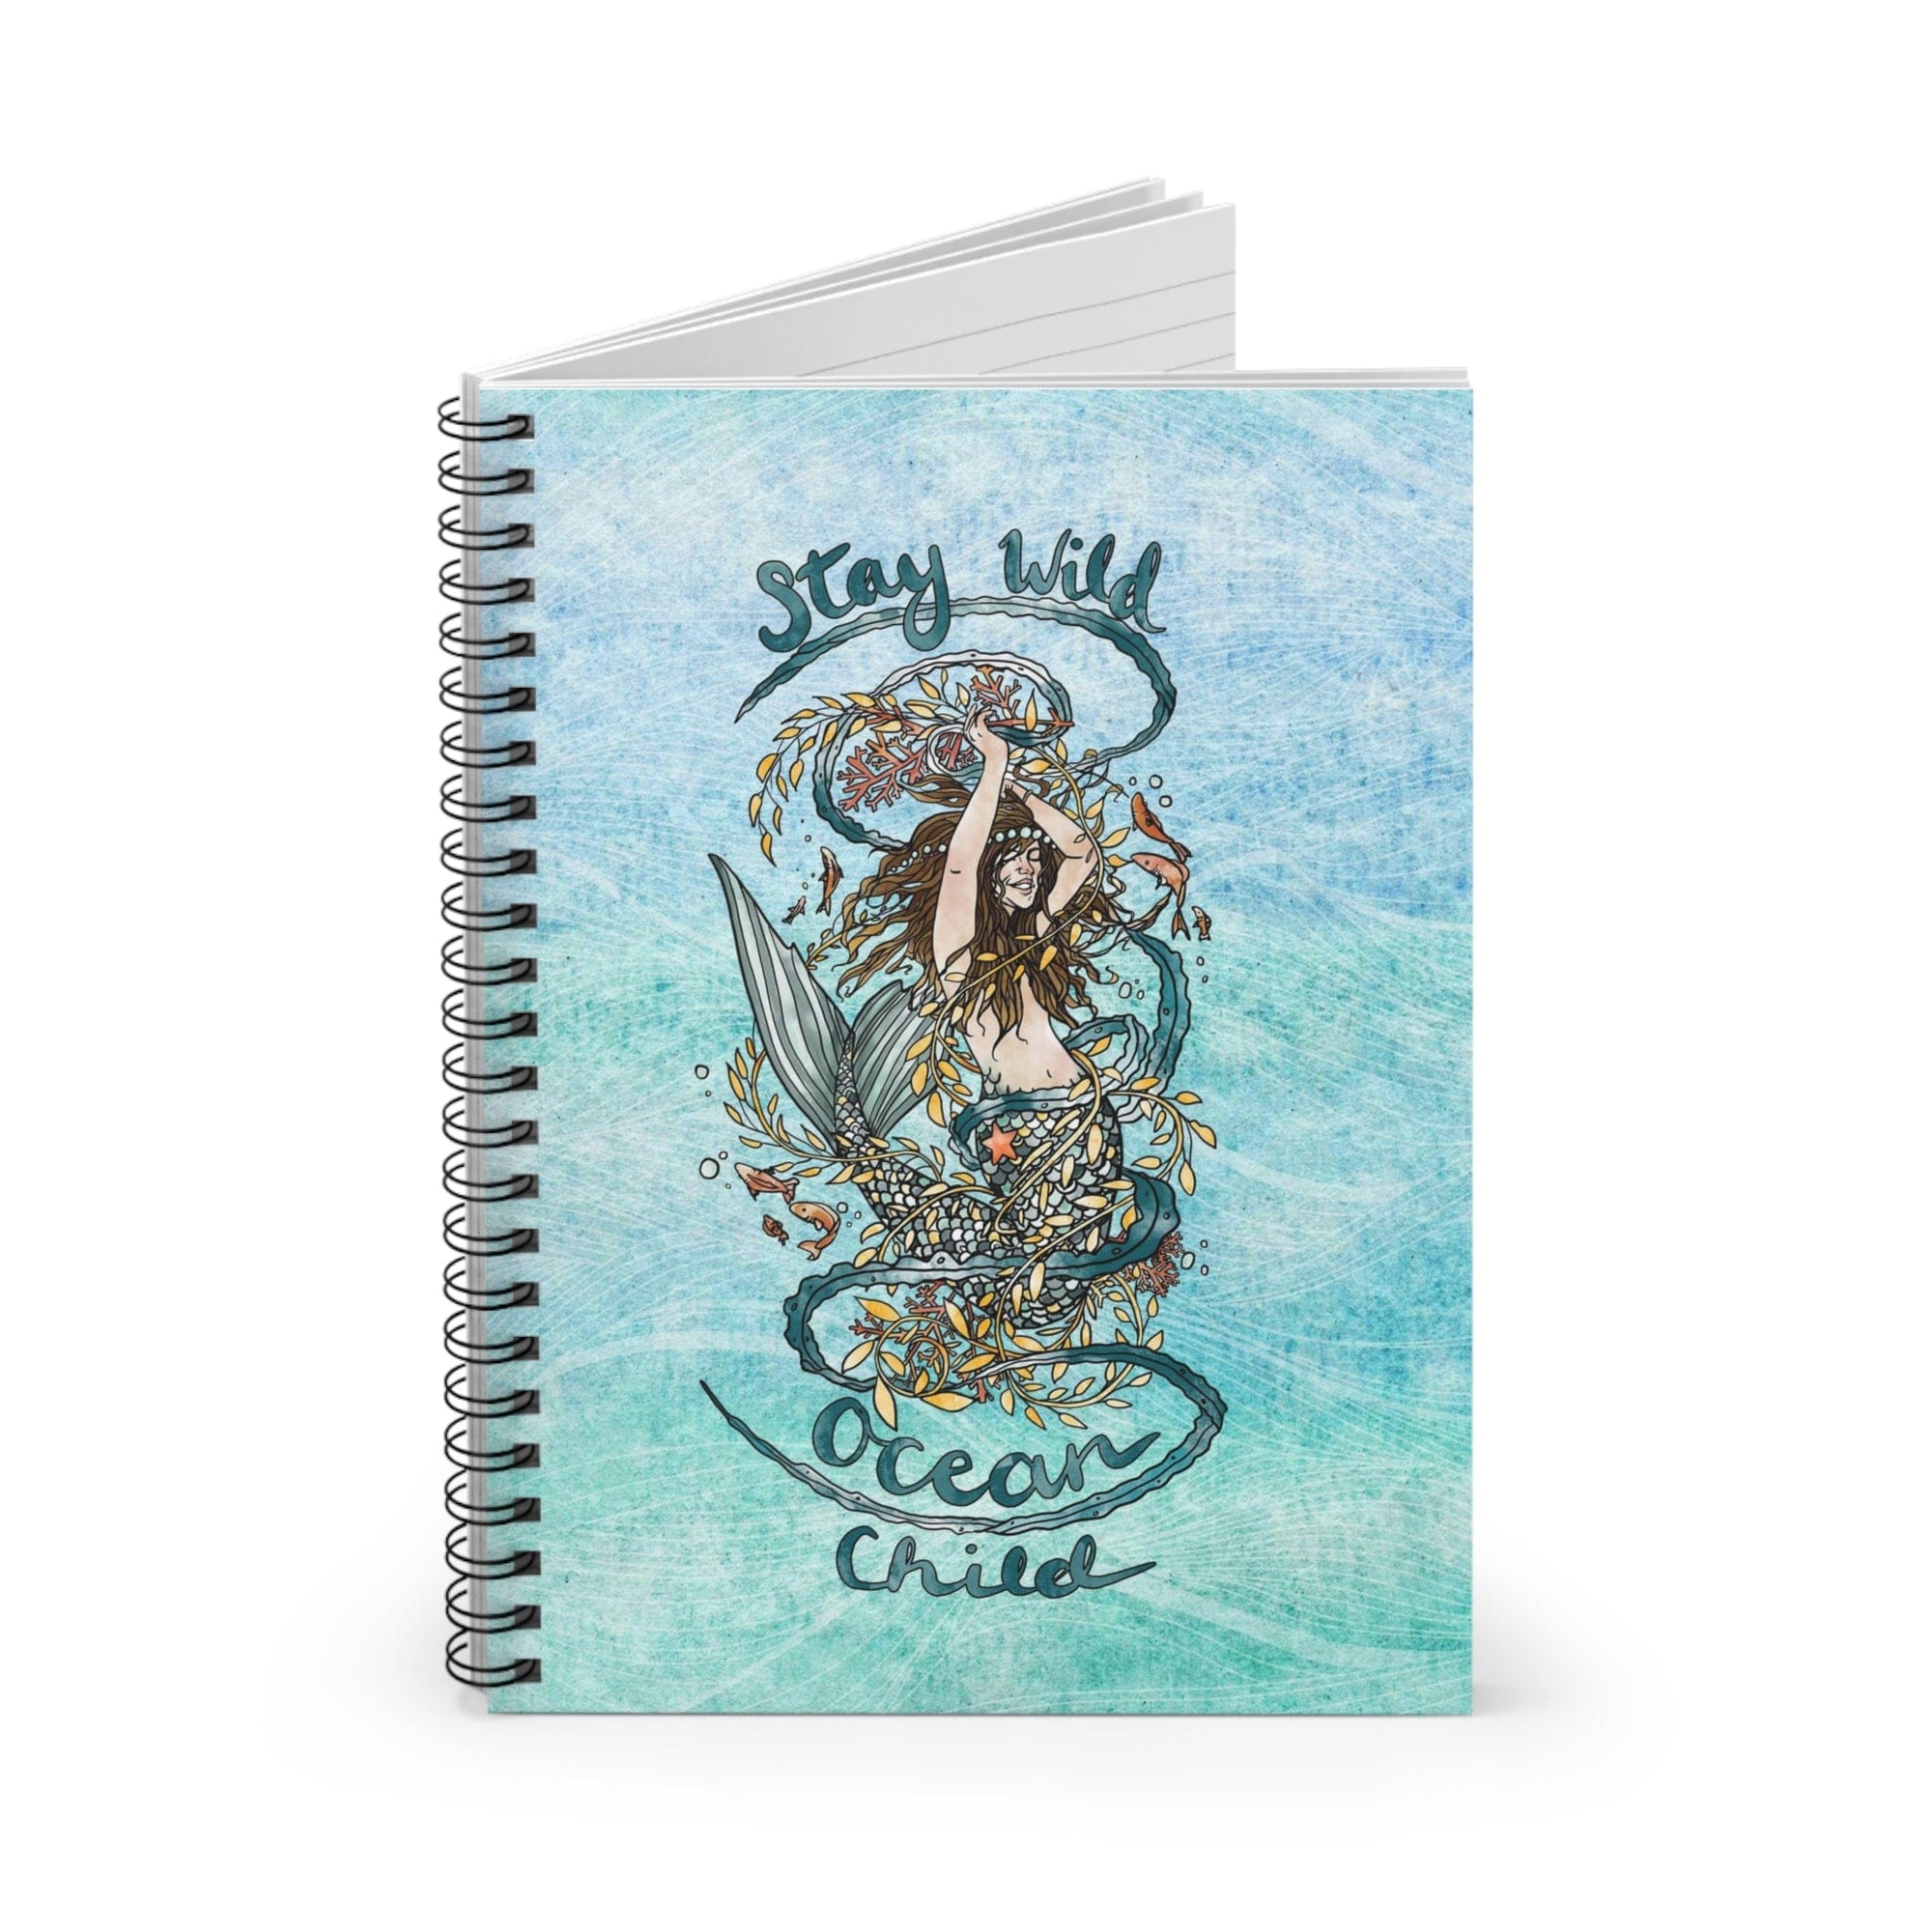 Stay Wild Ocean Child Spiral Notebook - Ruled Line - Mountains & Mermaids